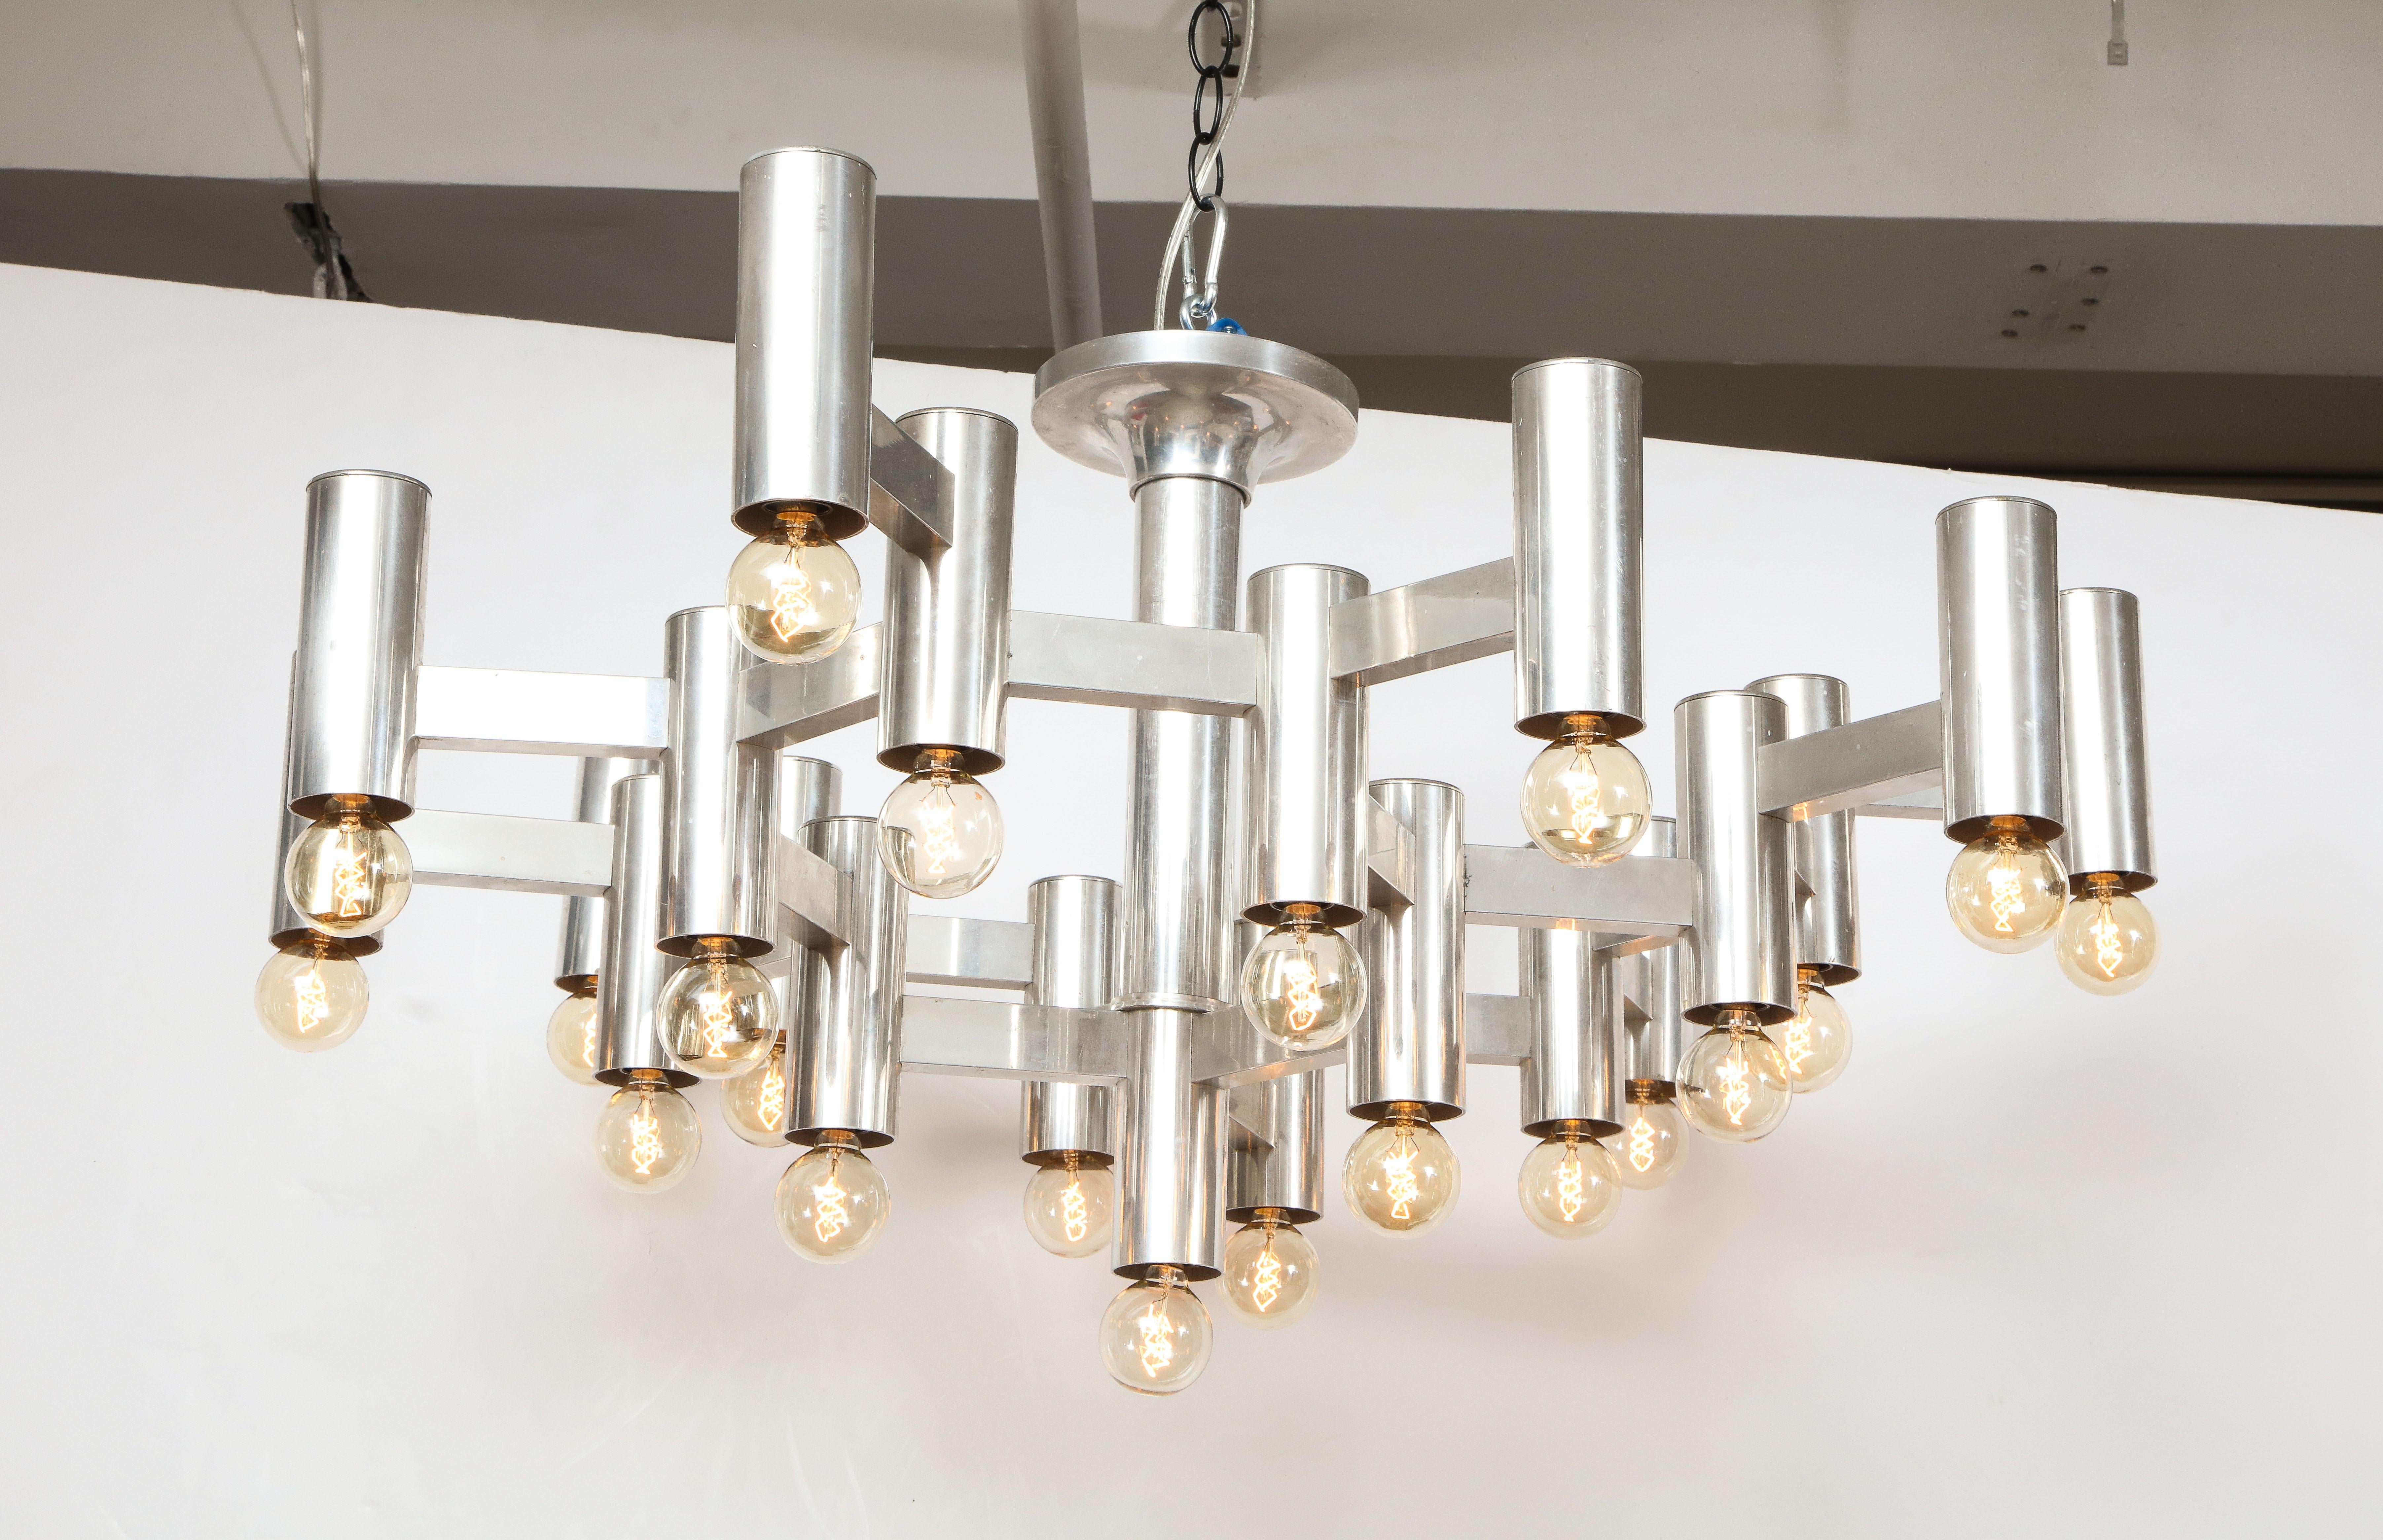 Stainless Steel Alveolus Chandelier by Gaetano Sciolari, Italy, c. 1970s In Good Condition For Sale In New York City, NY